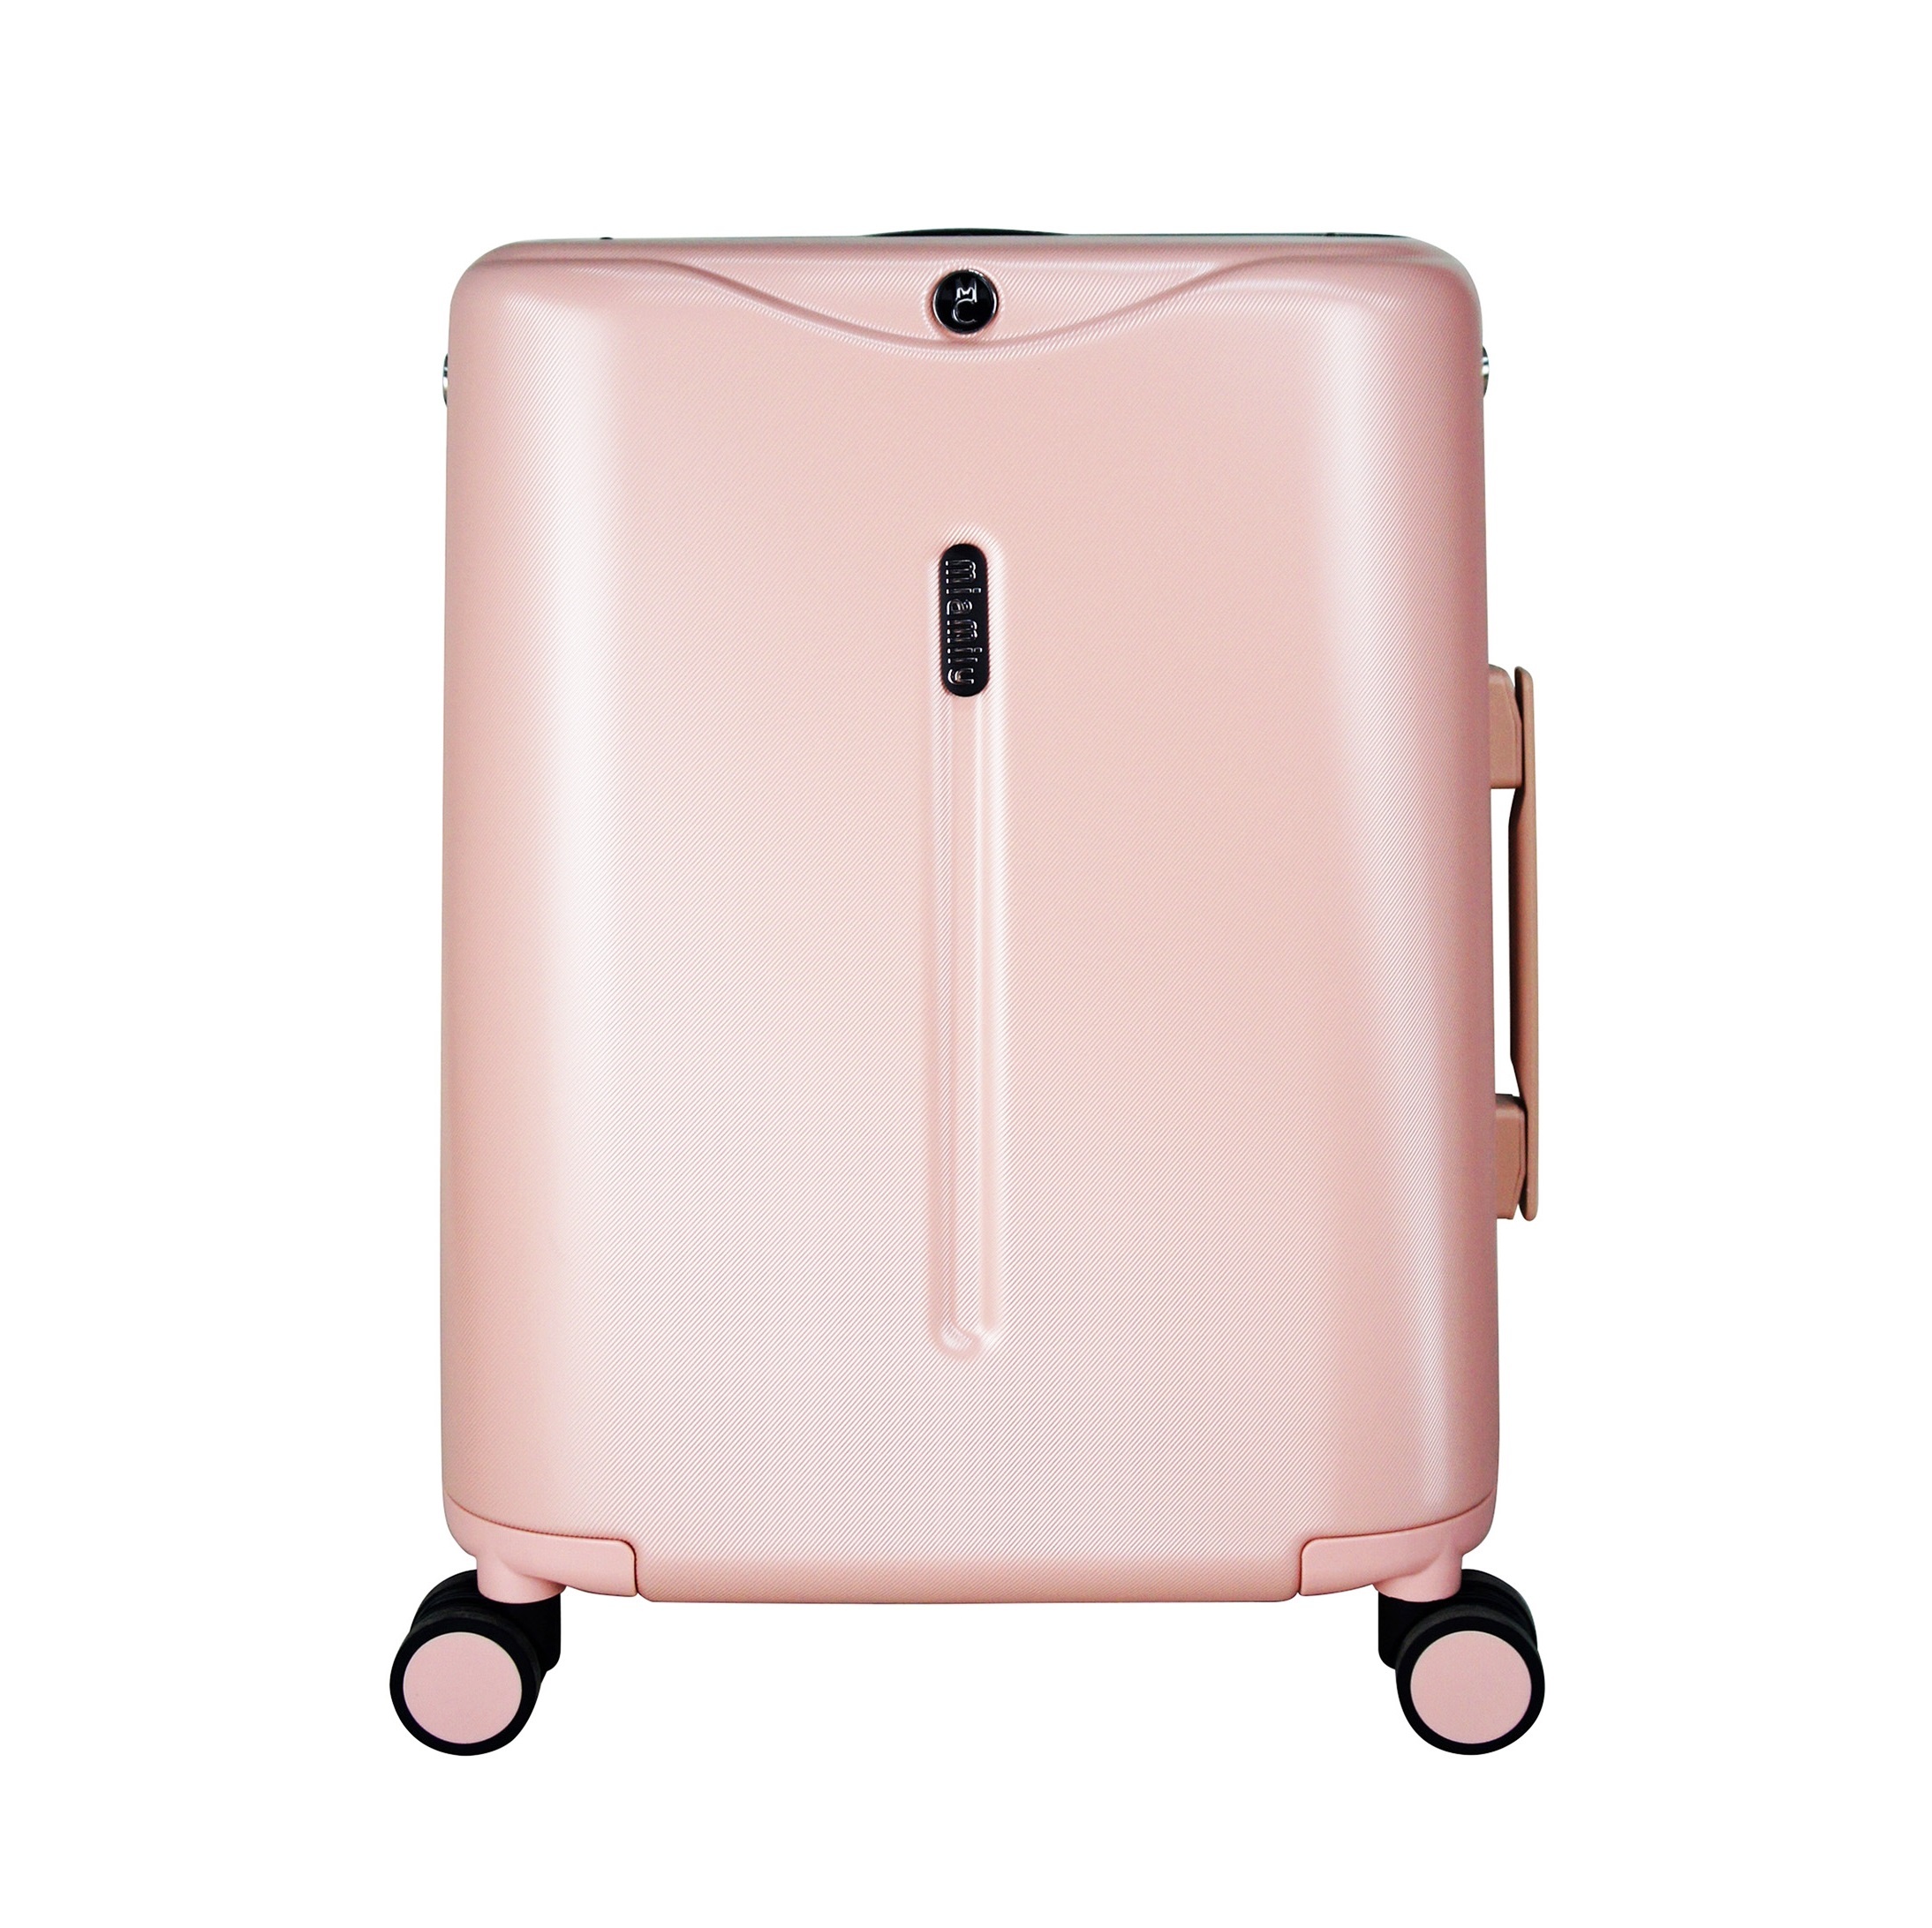 MiaMily Carry on 20 Luggage - The First Ride on Luggage for Both Children and Adults, Accommodating Up to 220lbs. Champagne Gold / 18